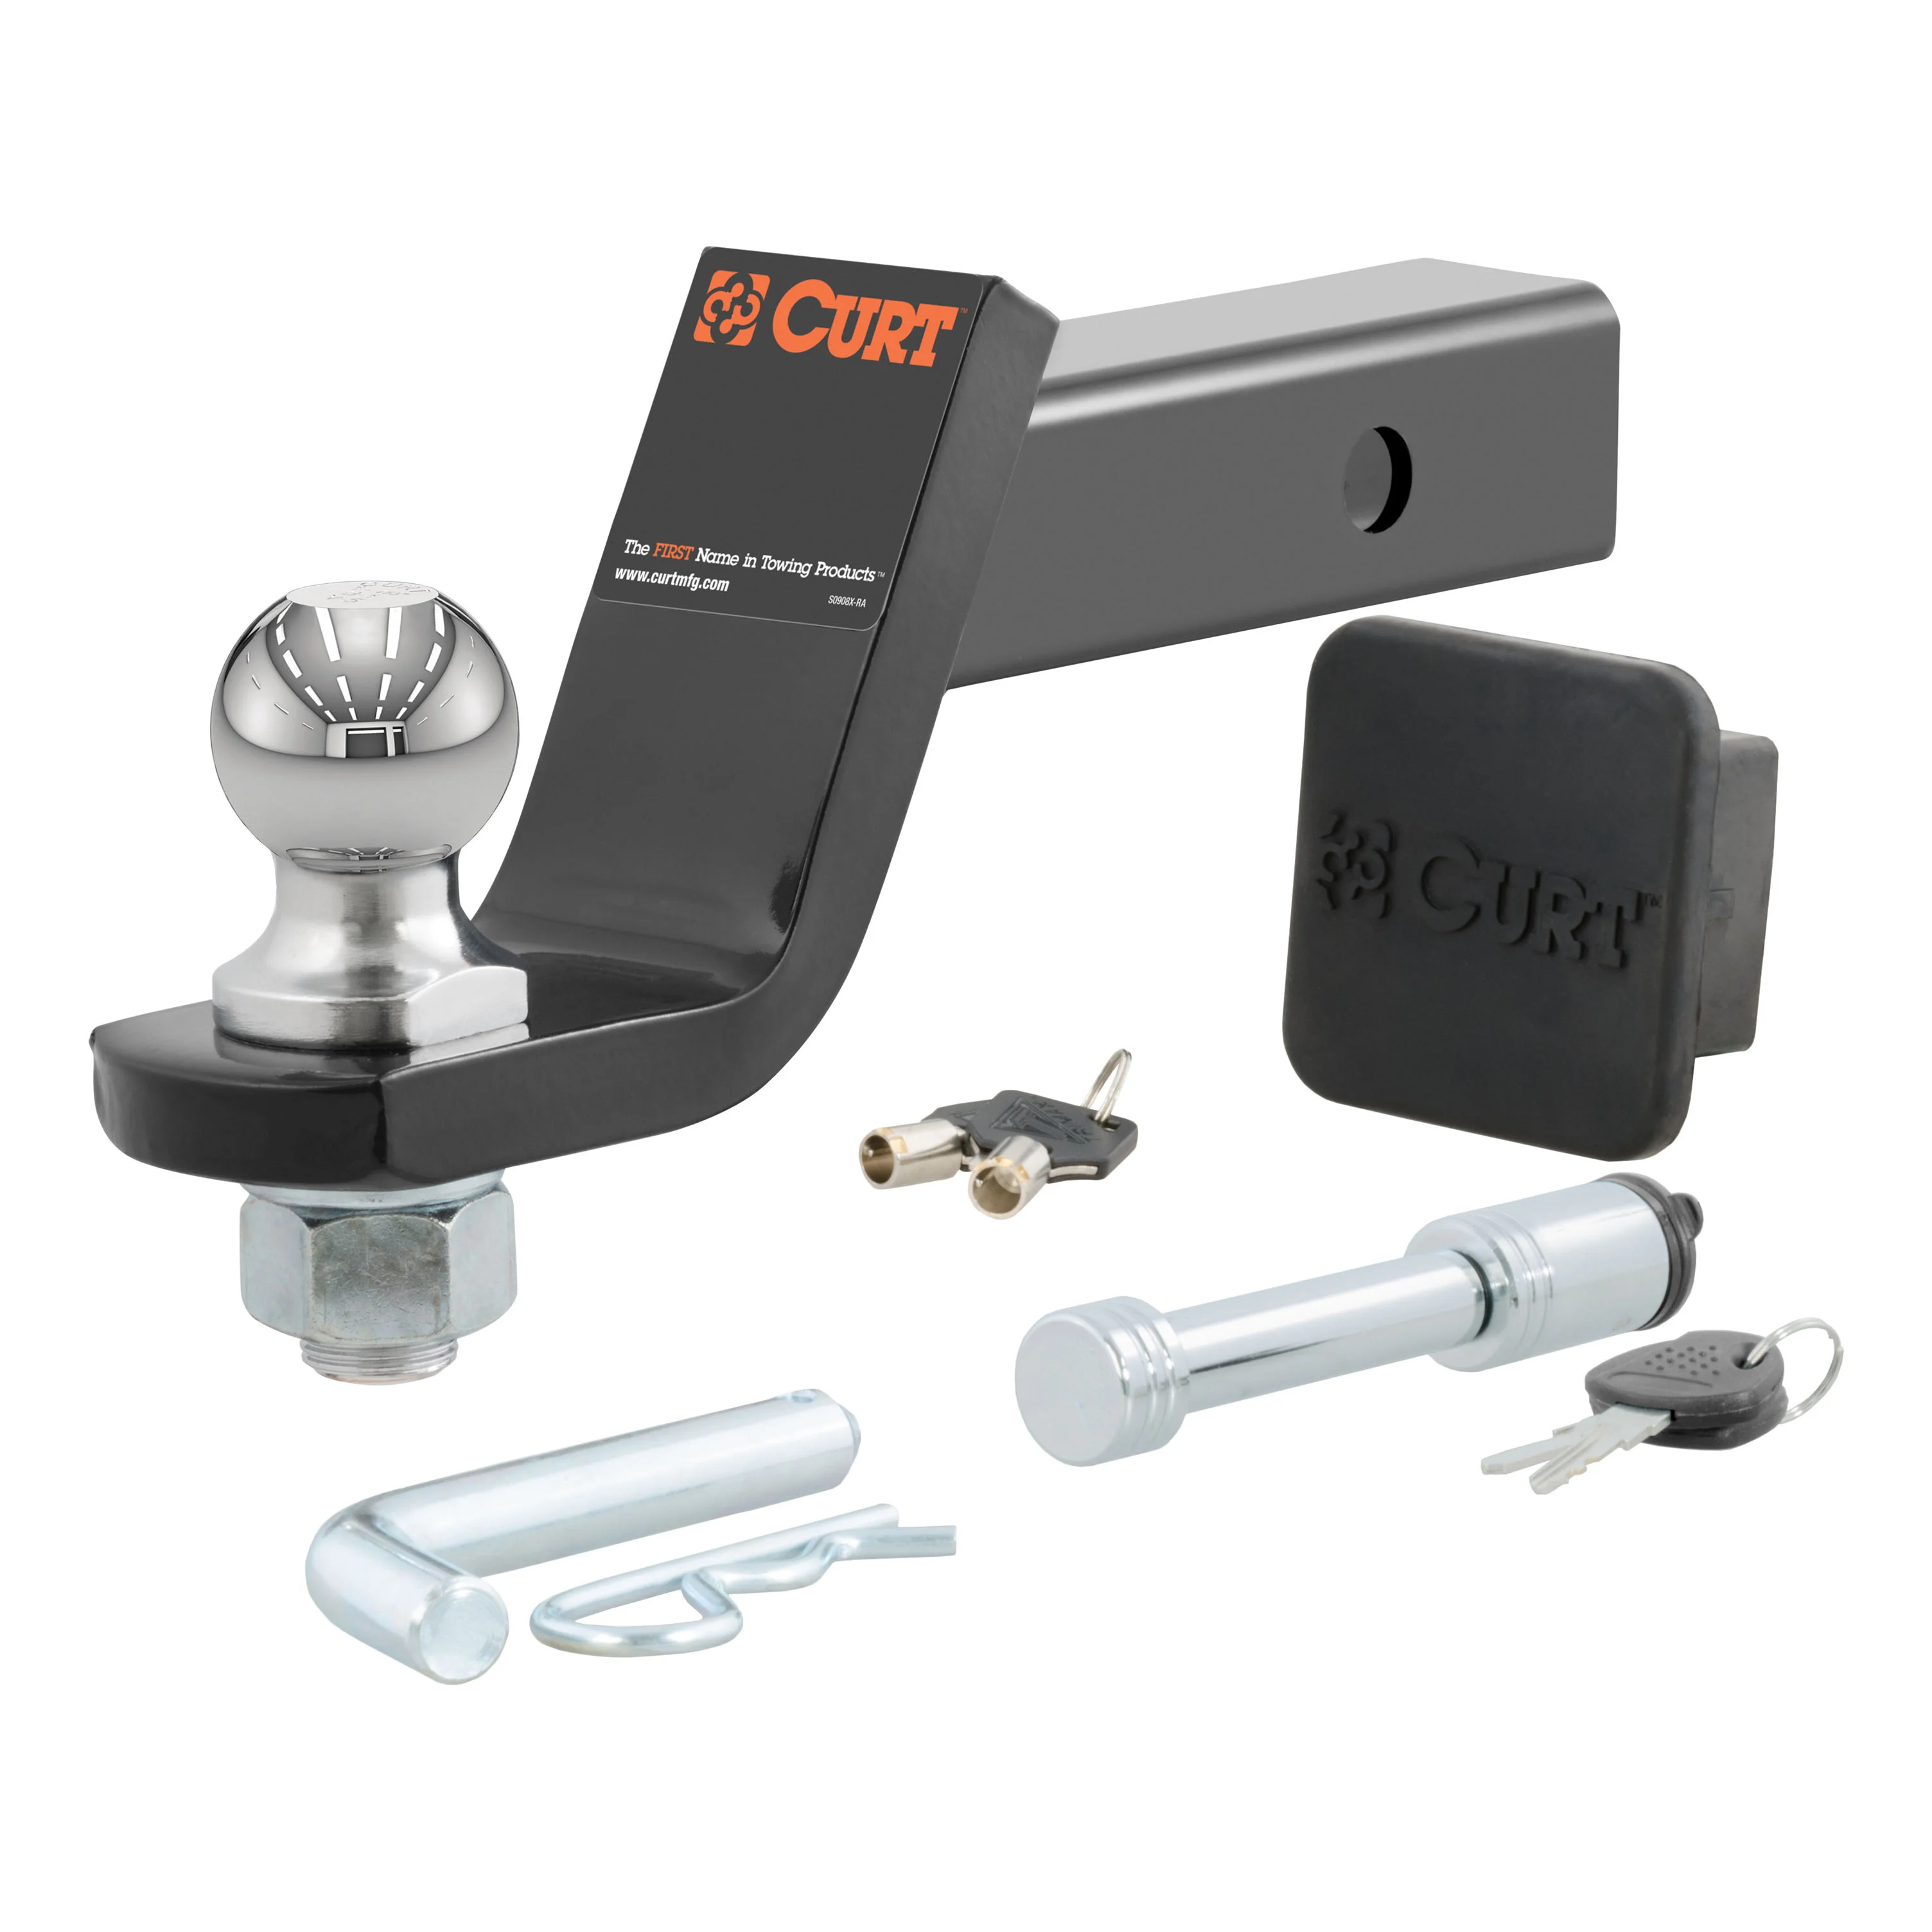 OEM 2013 Dodge Durango Curt Towing Starter Kit 2-inch ball, 2-inch shank with 4-inch drop (Part #68628506AA)